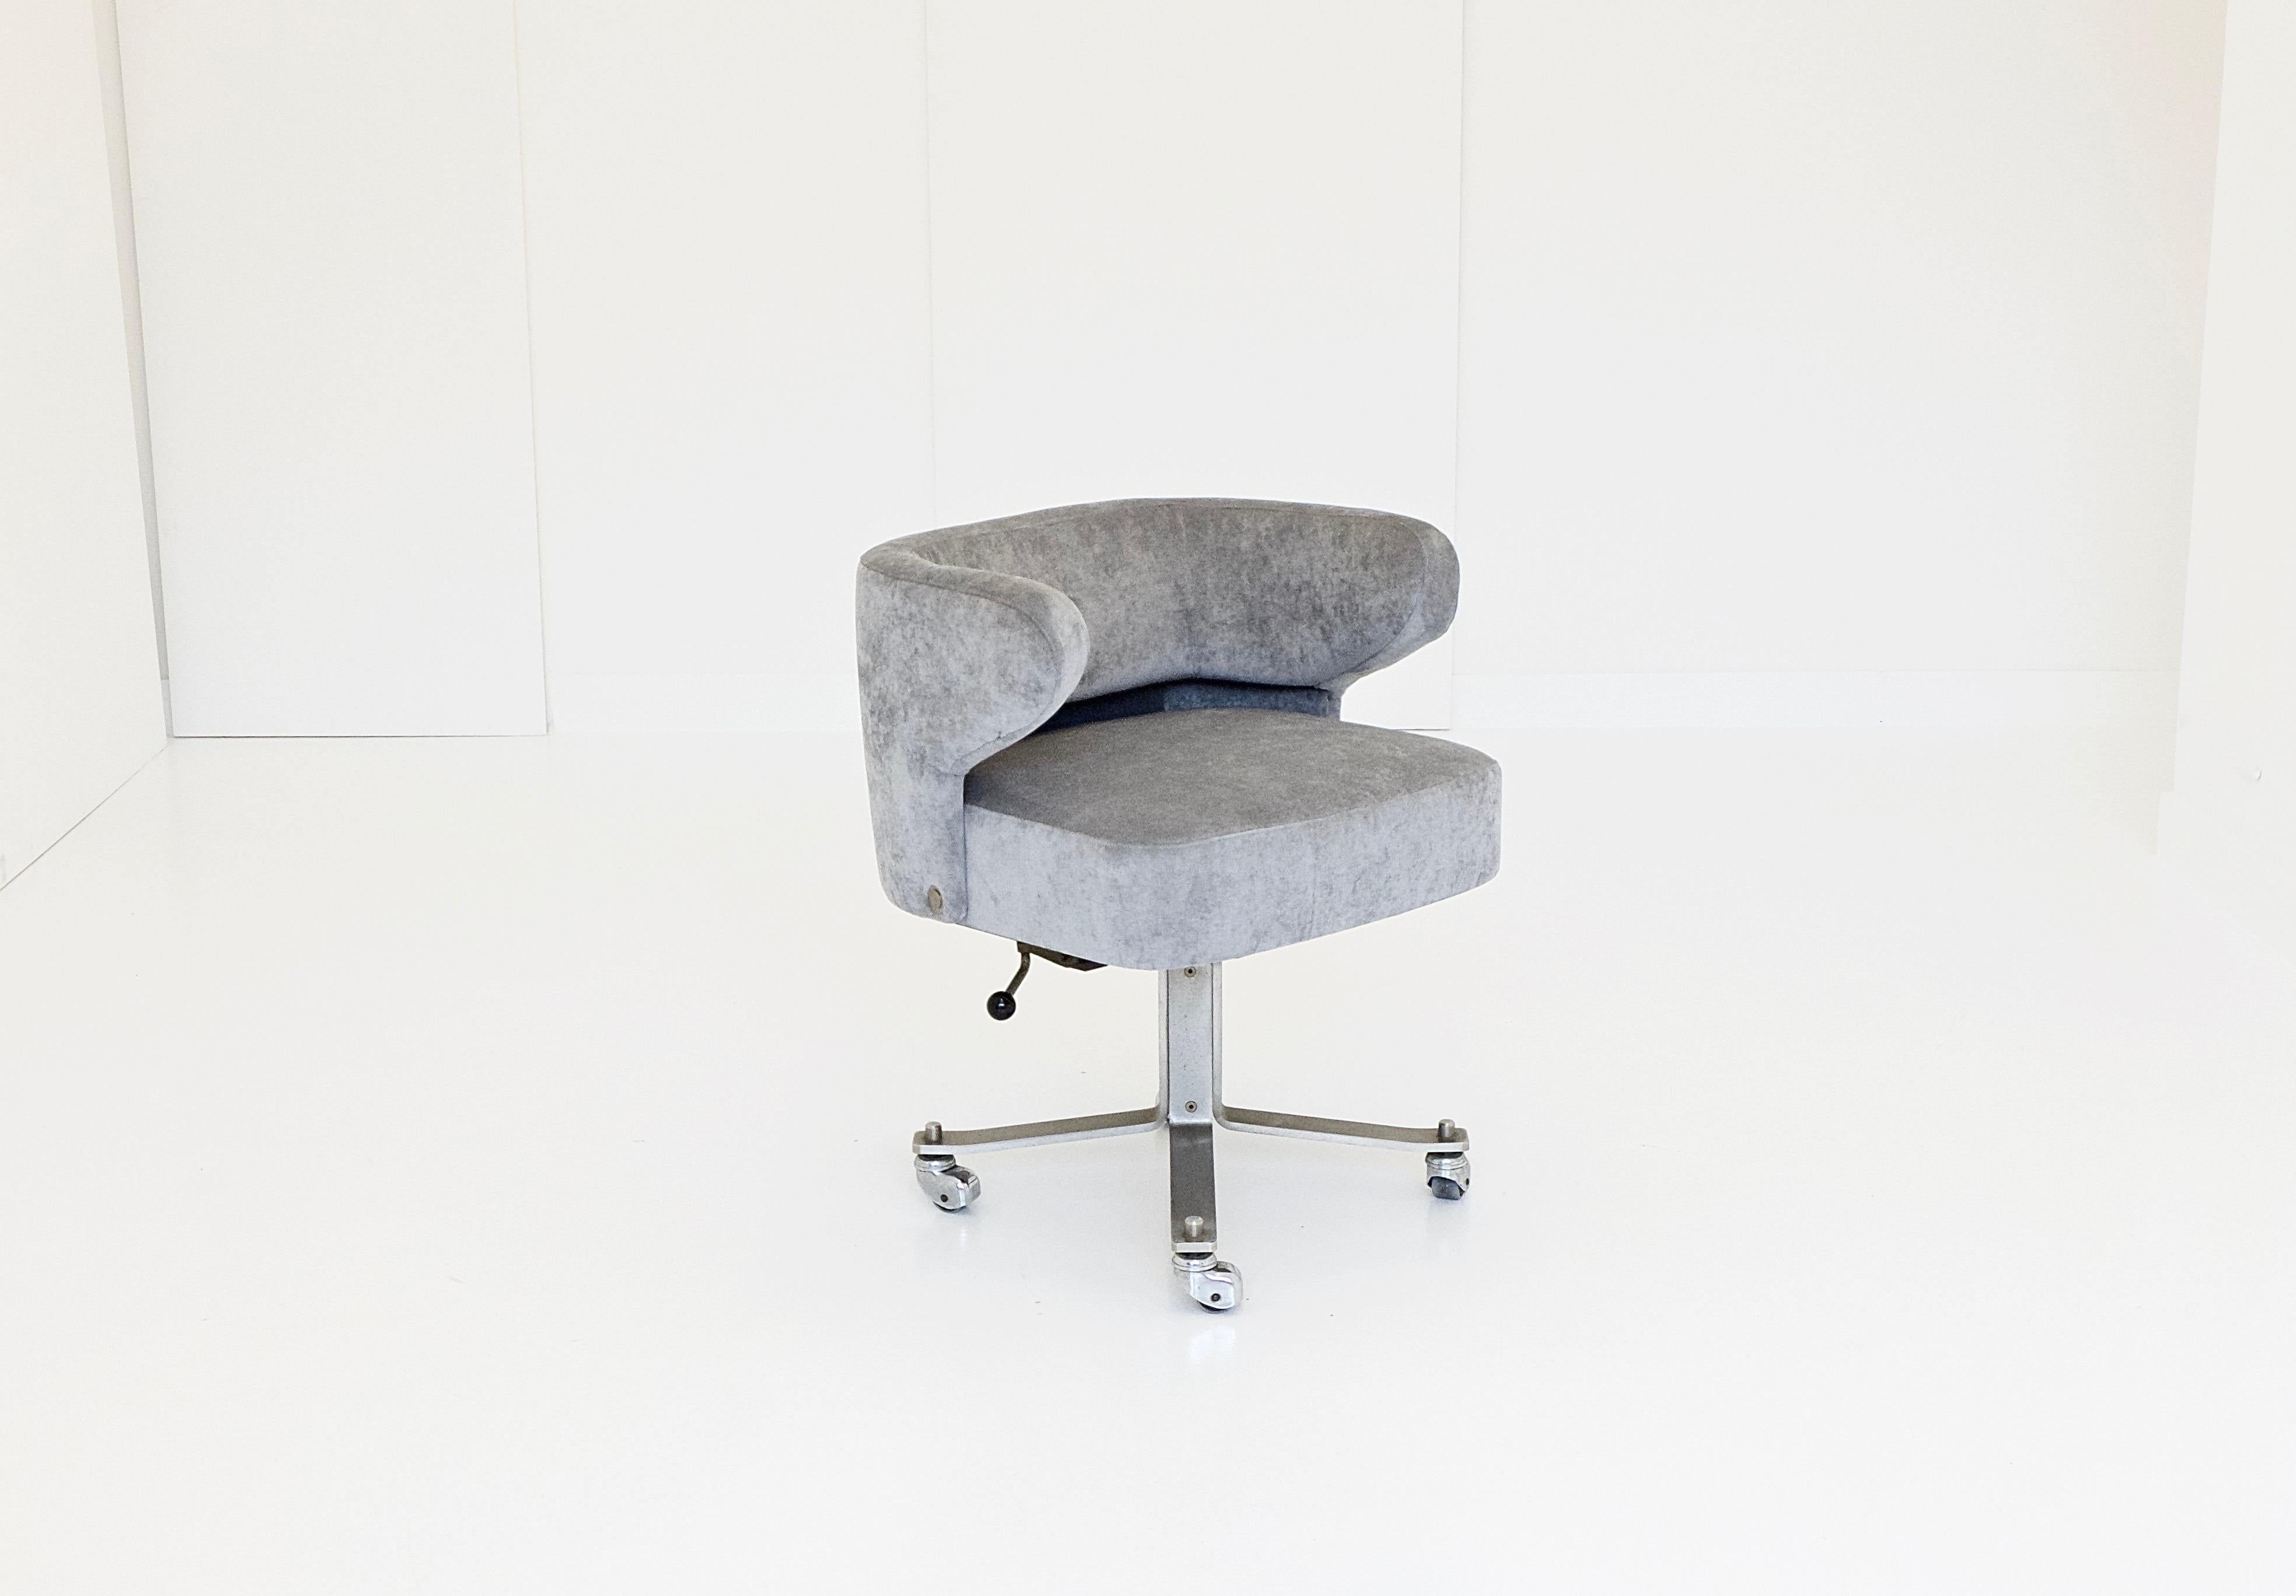 A swivelling, height adjustable desk chairs, solid brushed steel base, 4-star-legs forming a mono column, revolving padded seat with back/arm shell, covered with pearl grey velvet. Gianni Moscatelli for Formanova, circa 1970. Formanova makers mark